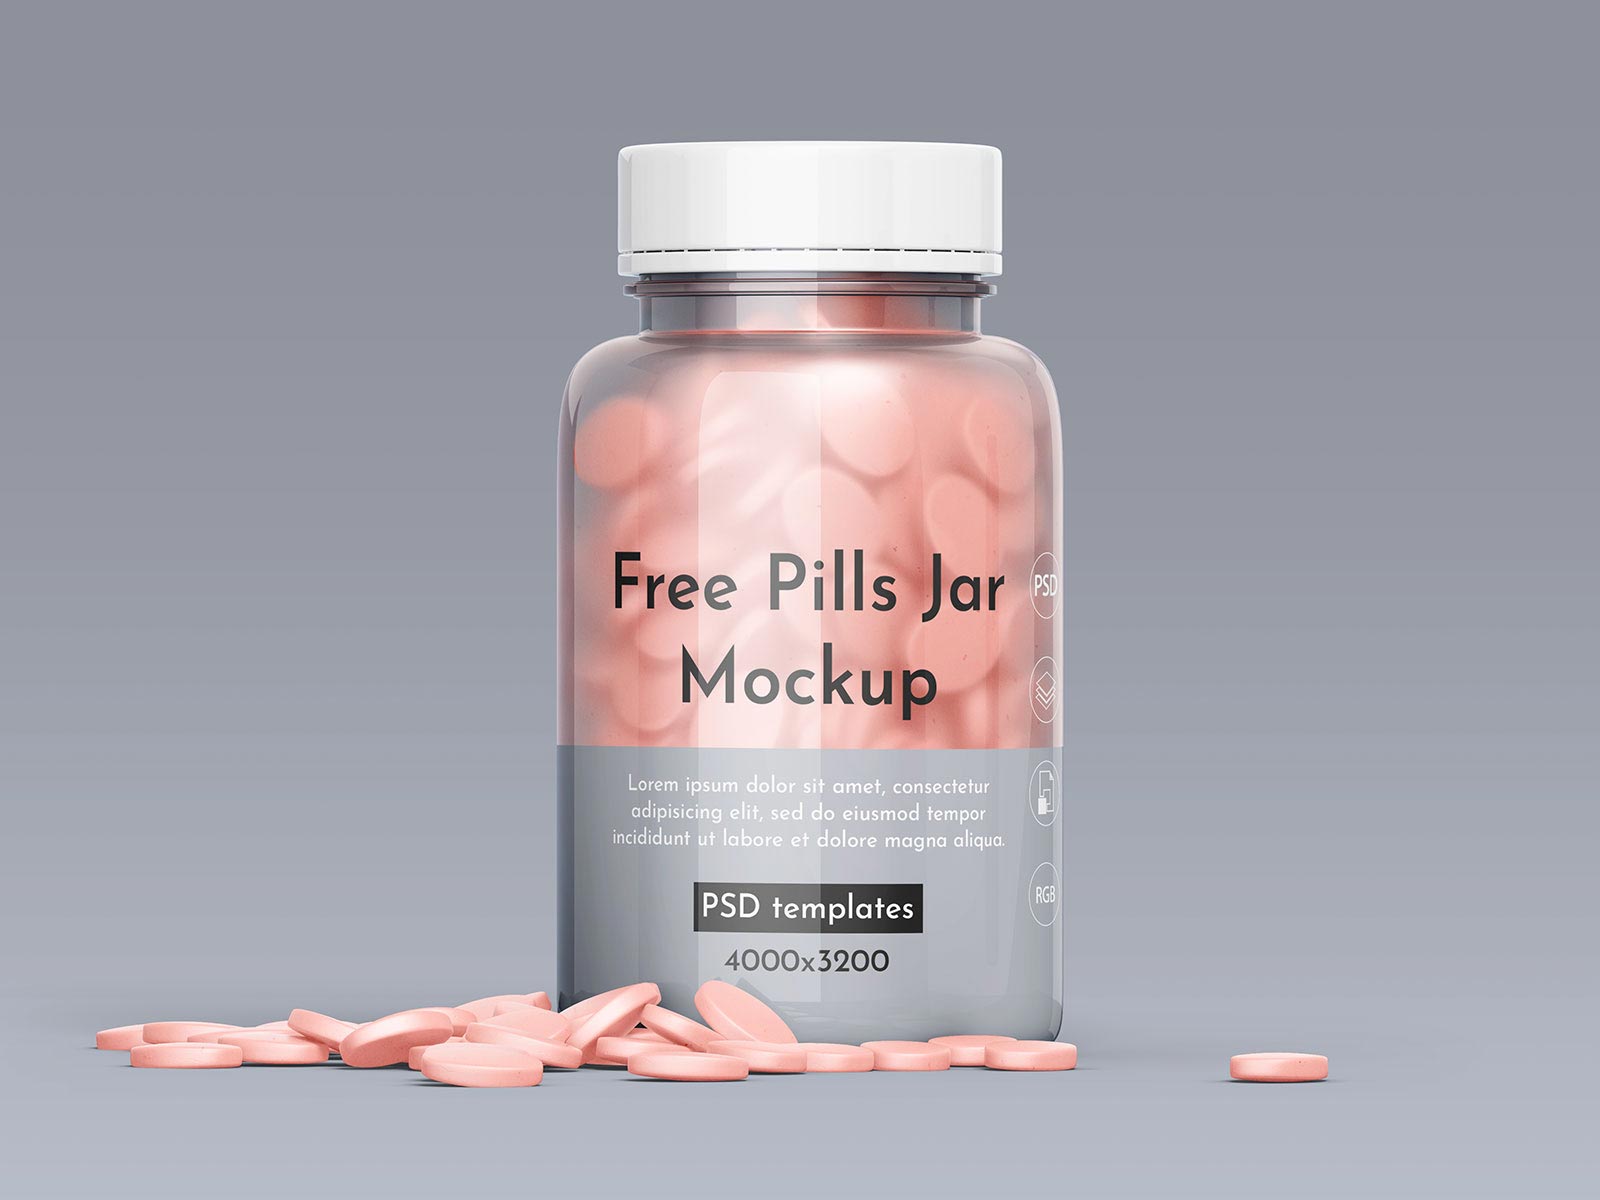 Free Pill Jar / Bottle Container Mockup PSD